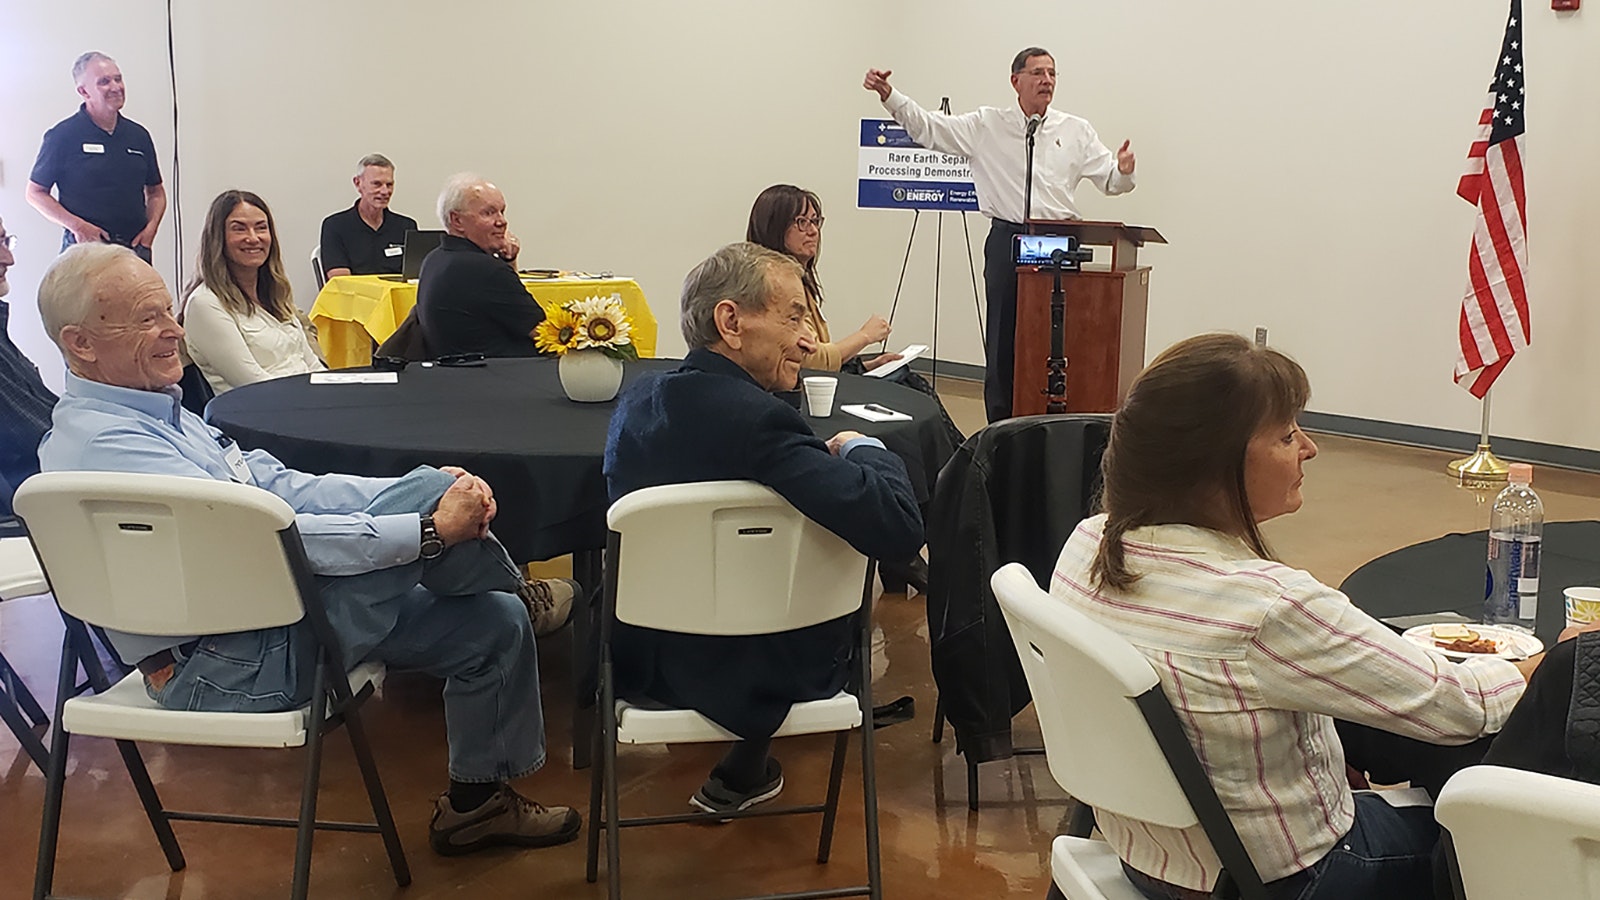 U.S. Sen. John Barrasso speaks to a standing-room-only crowd in Upton gathered to hear about progress on a demonstration scale plant for processing rare earths.